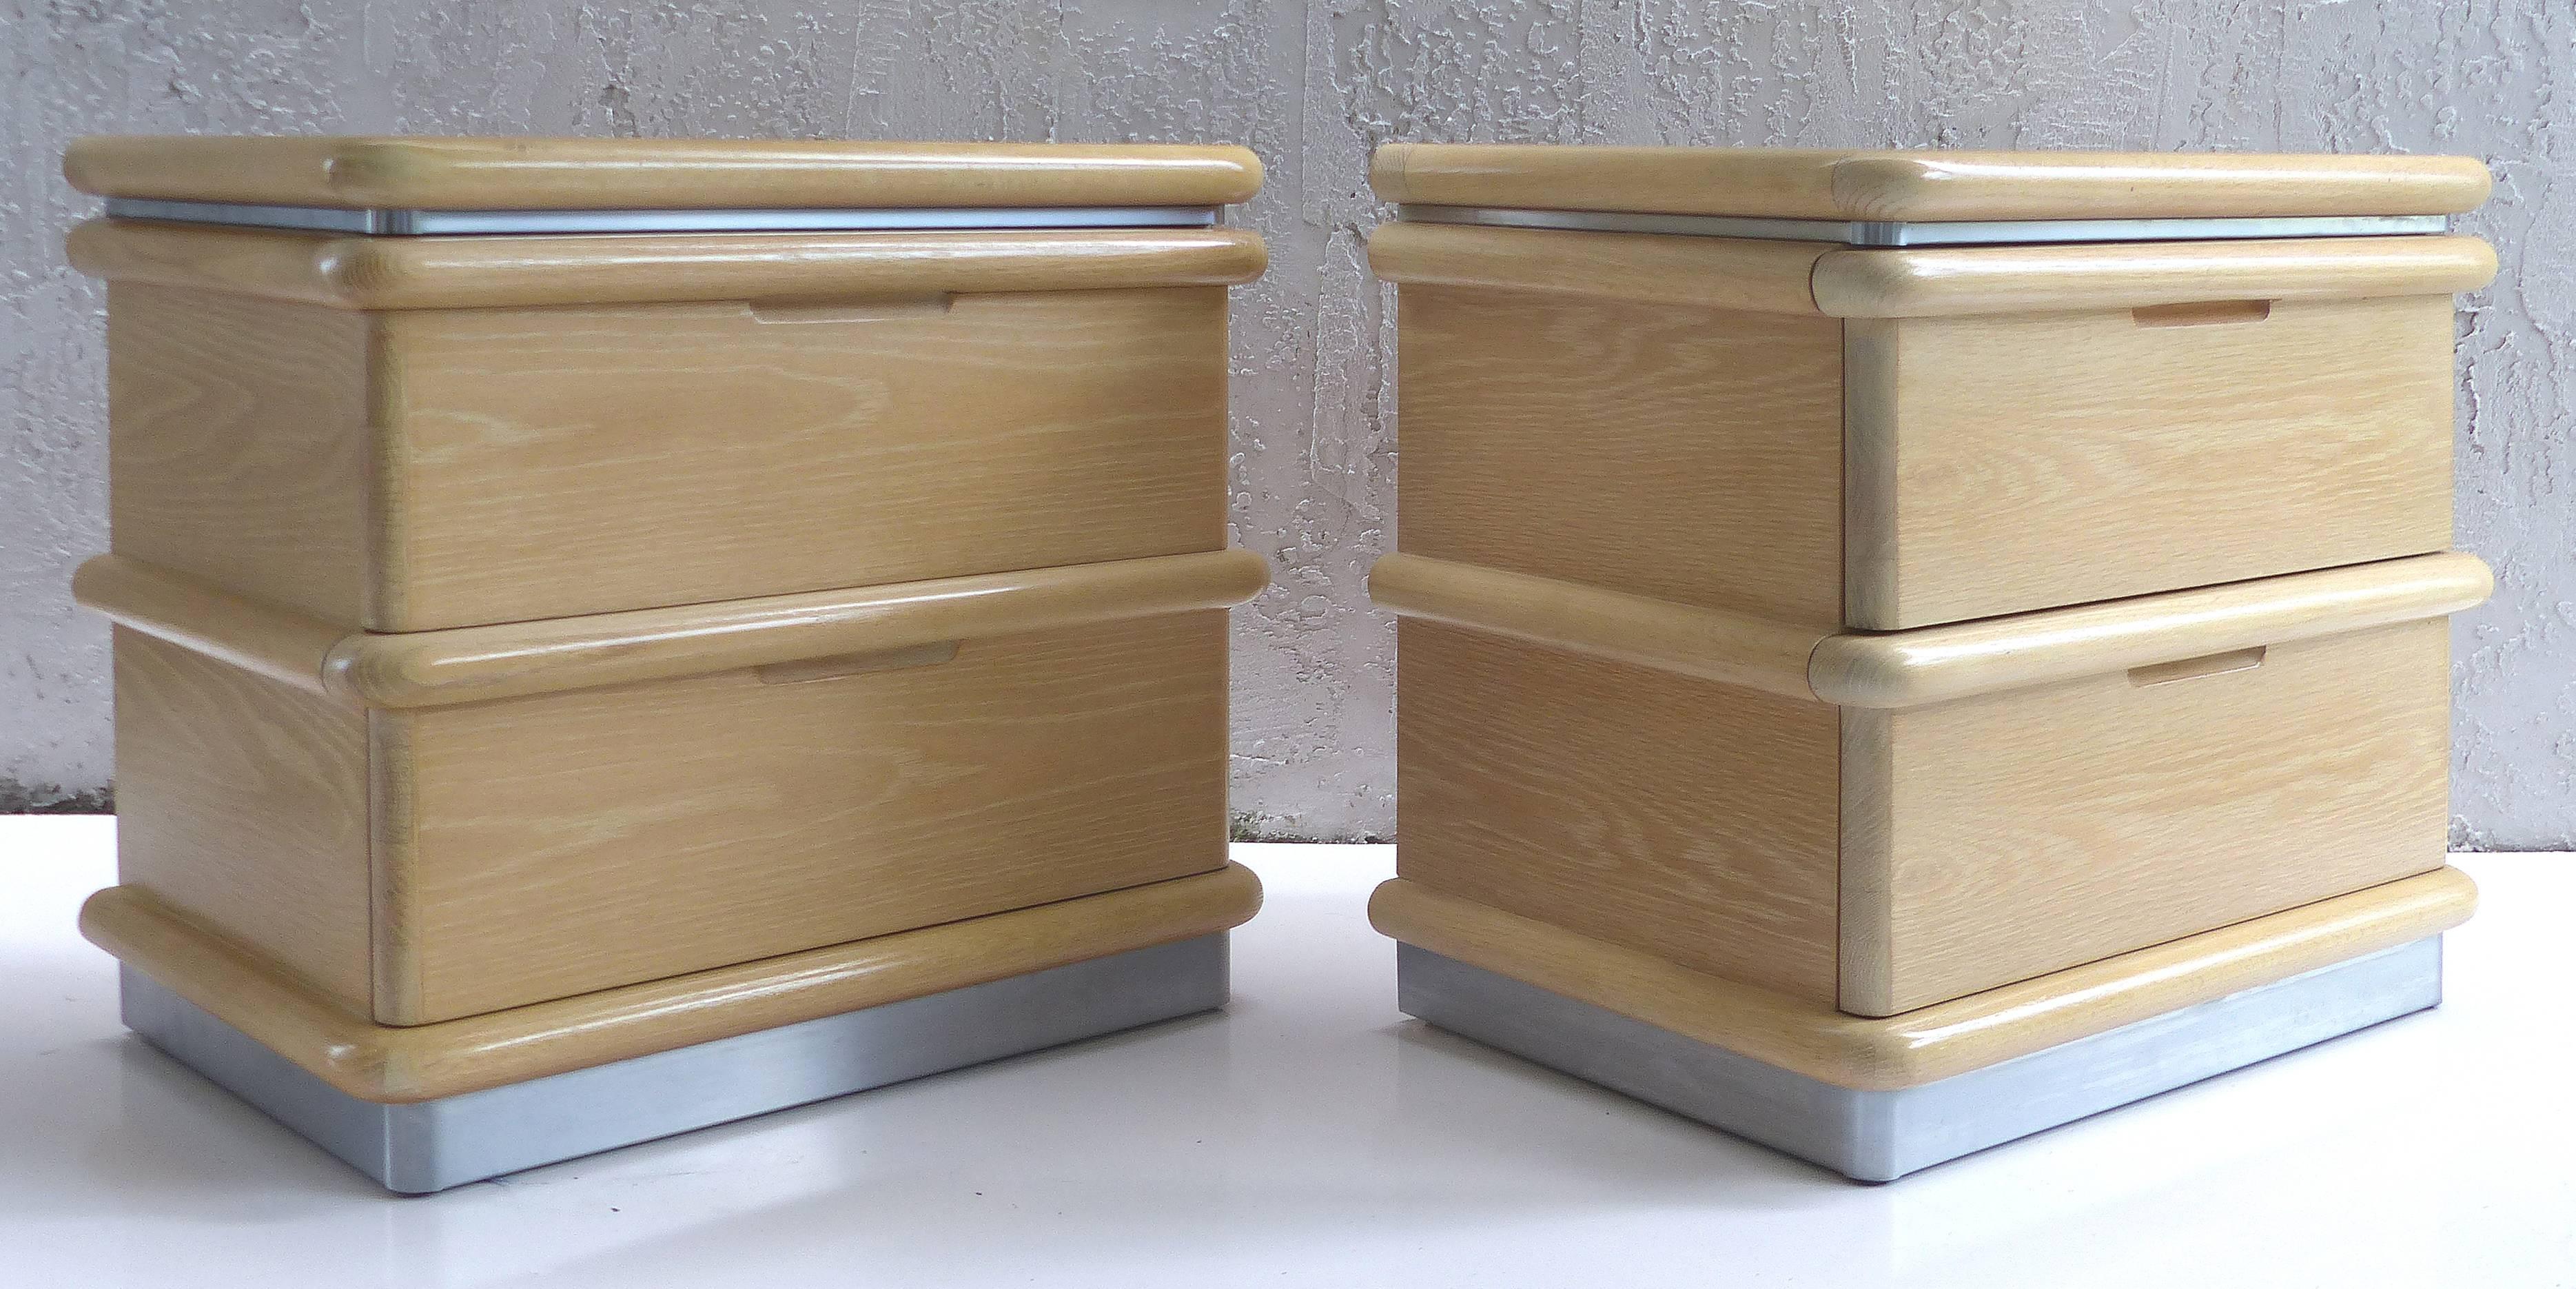 Offered for sale is a pair of circa 1970s cerused wood nightstands with brushed steel bases and trim by Jay Spectre for Century Furniture. The cabinets each have two drawers with rounded wood banding and each is signed within the top